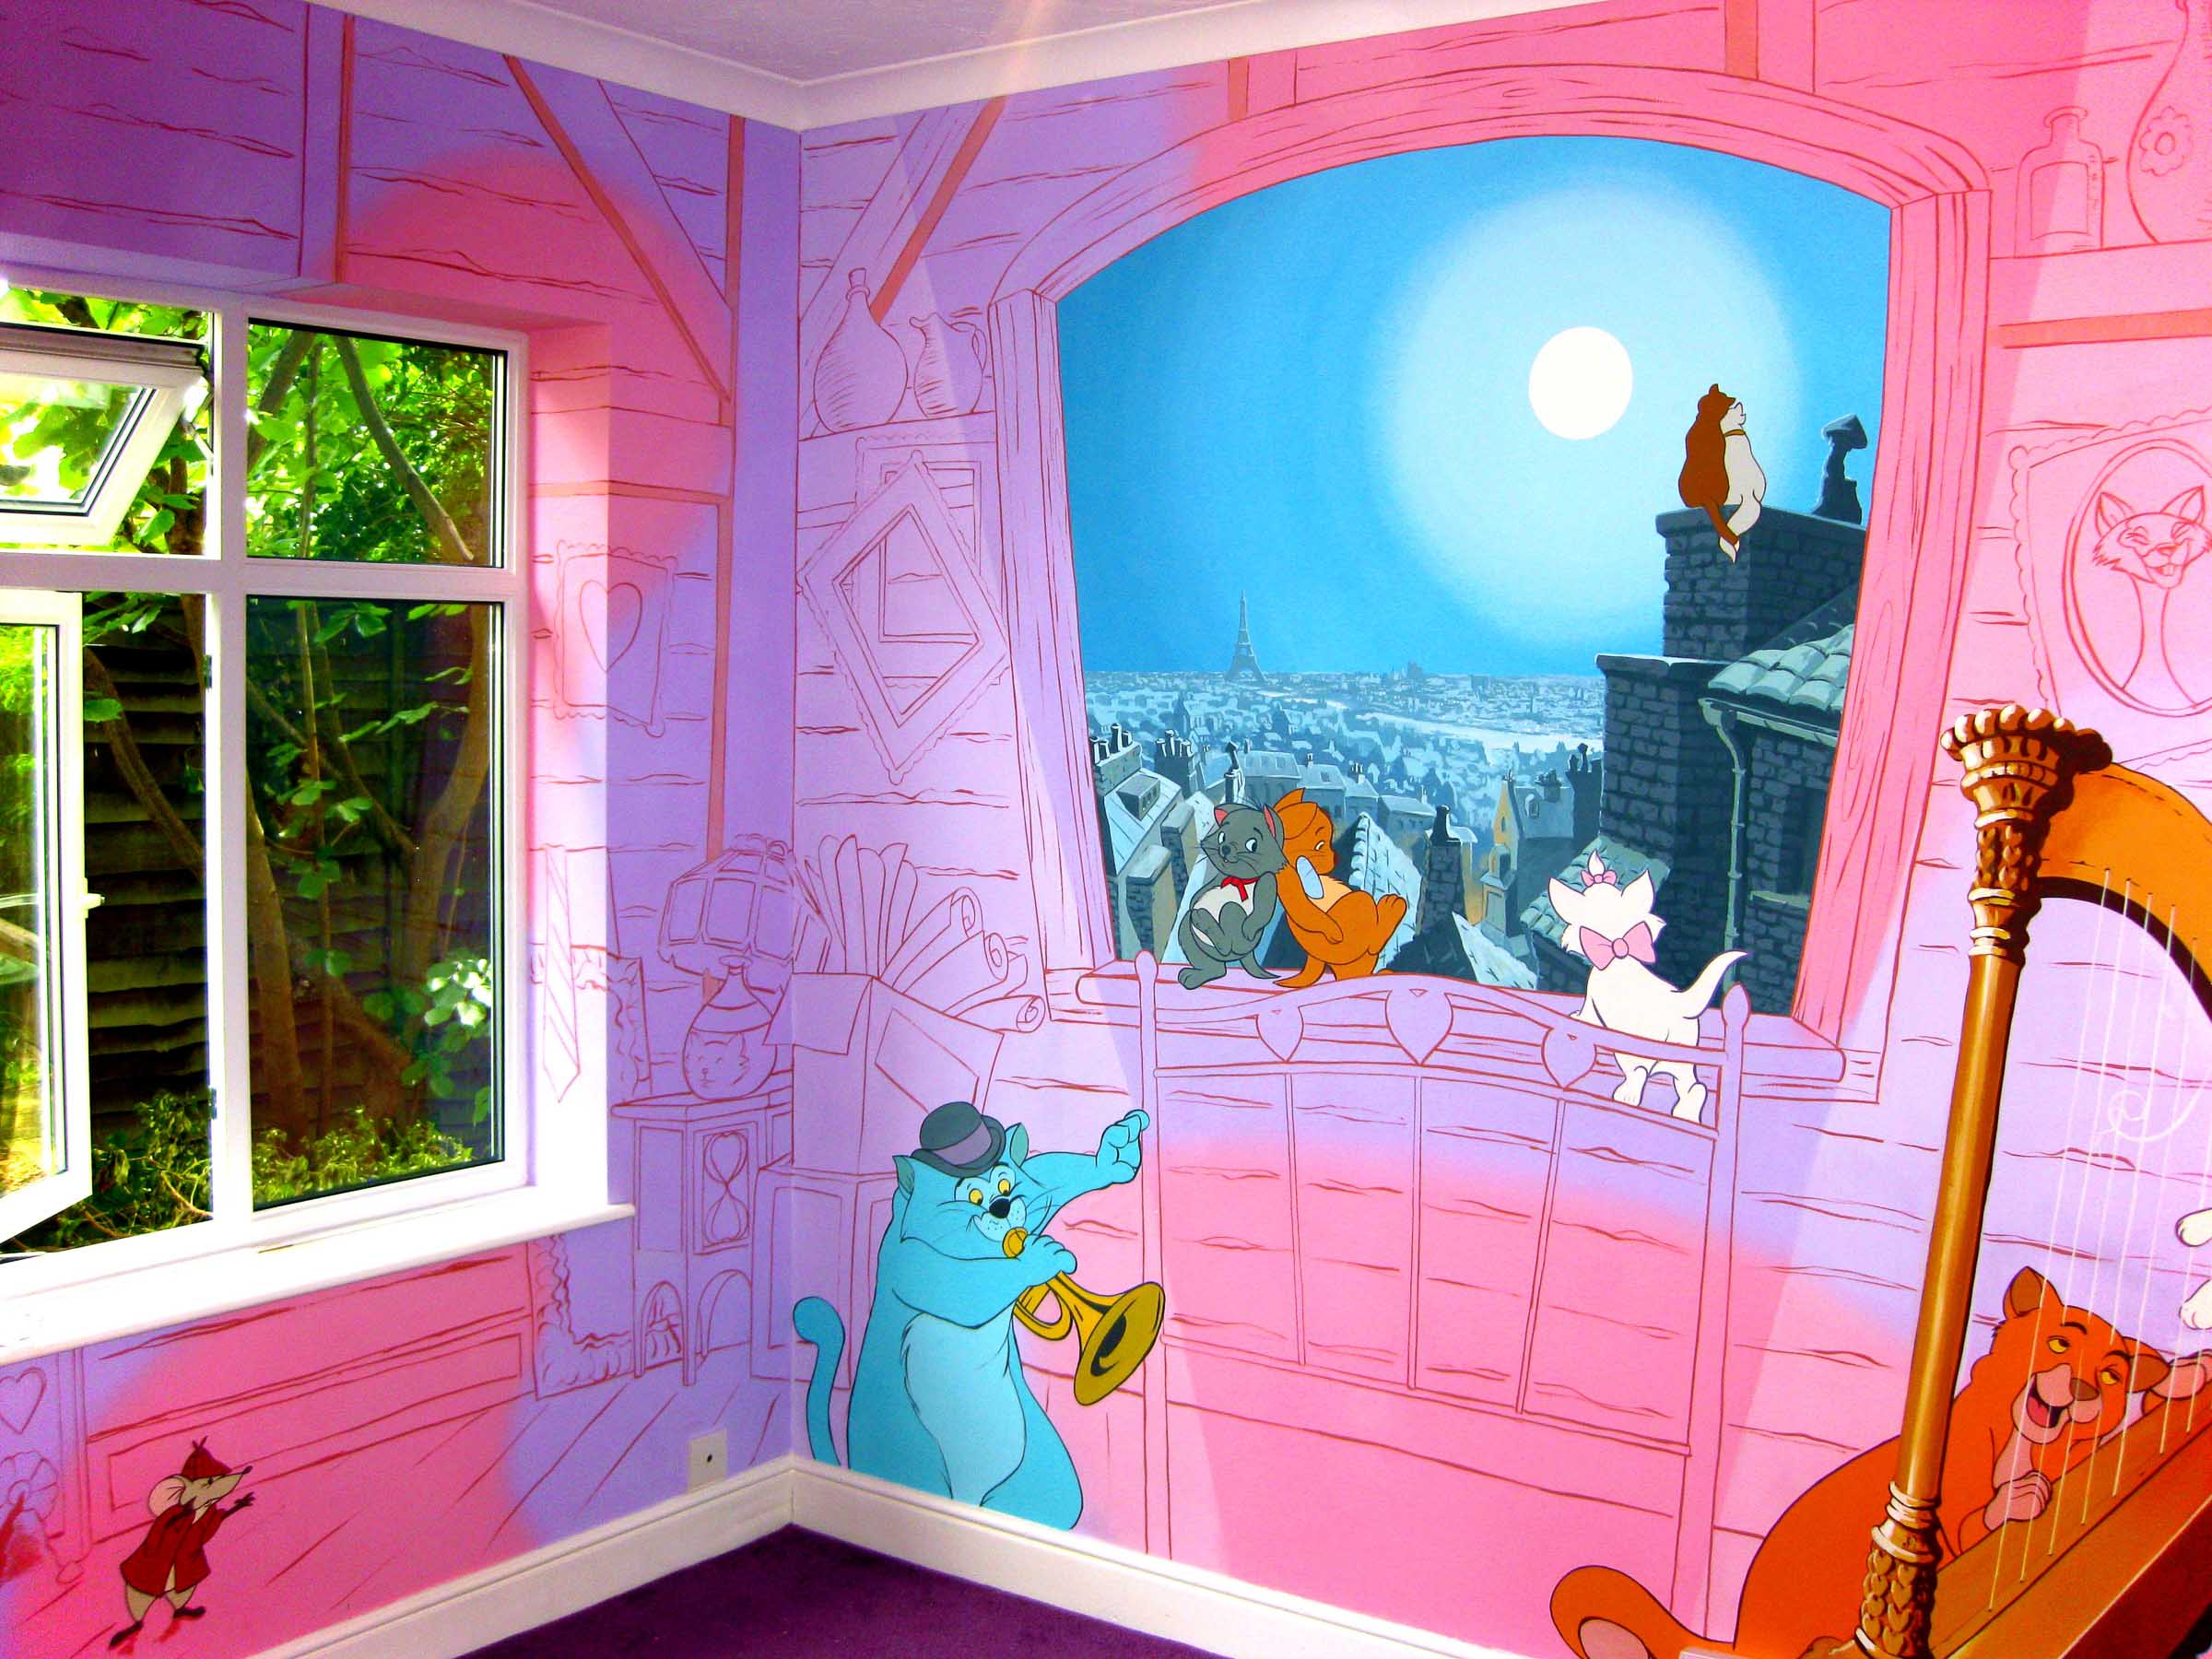 This Aristocats mural is painted around the whole room